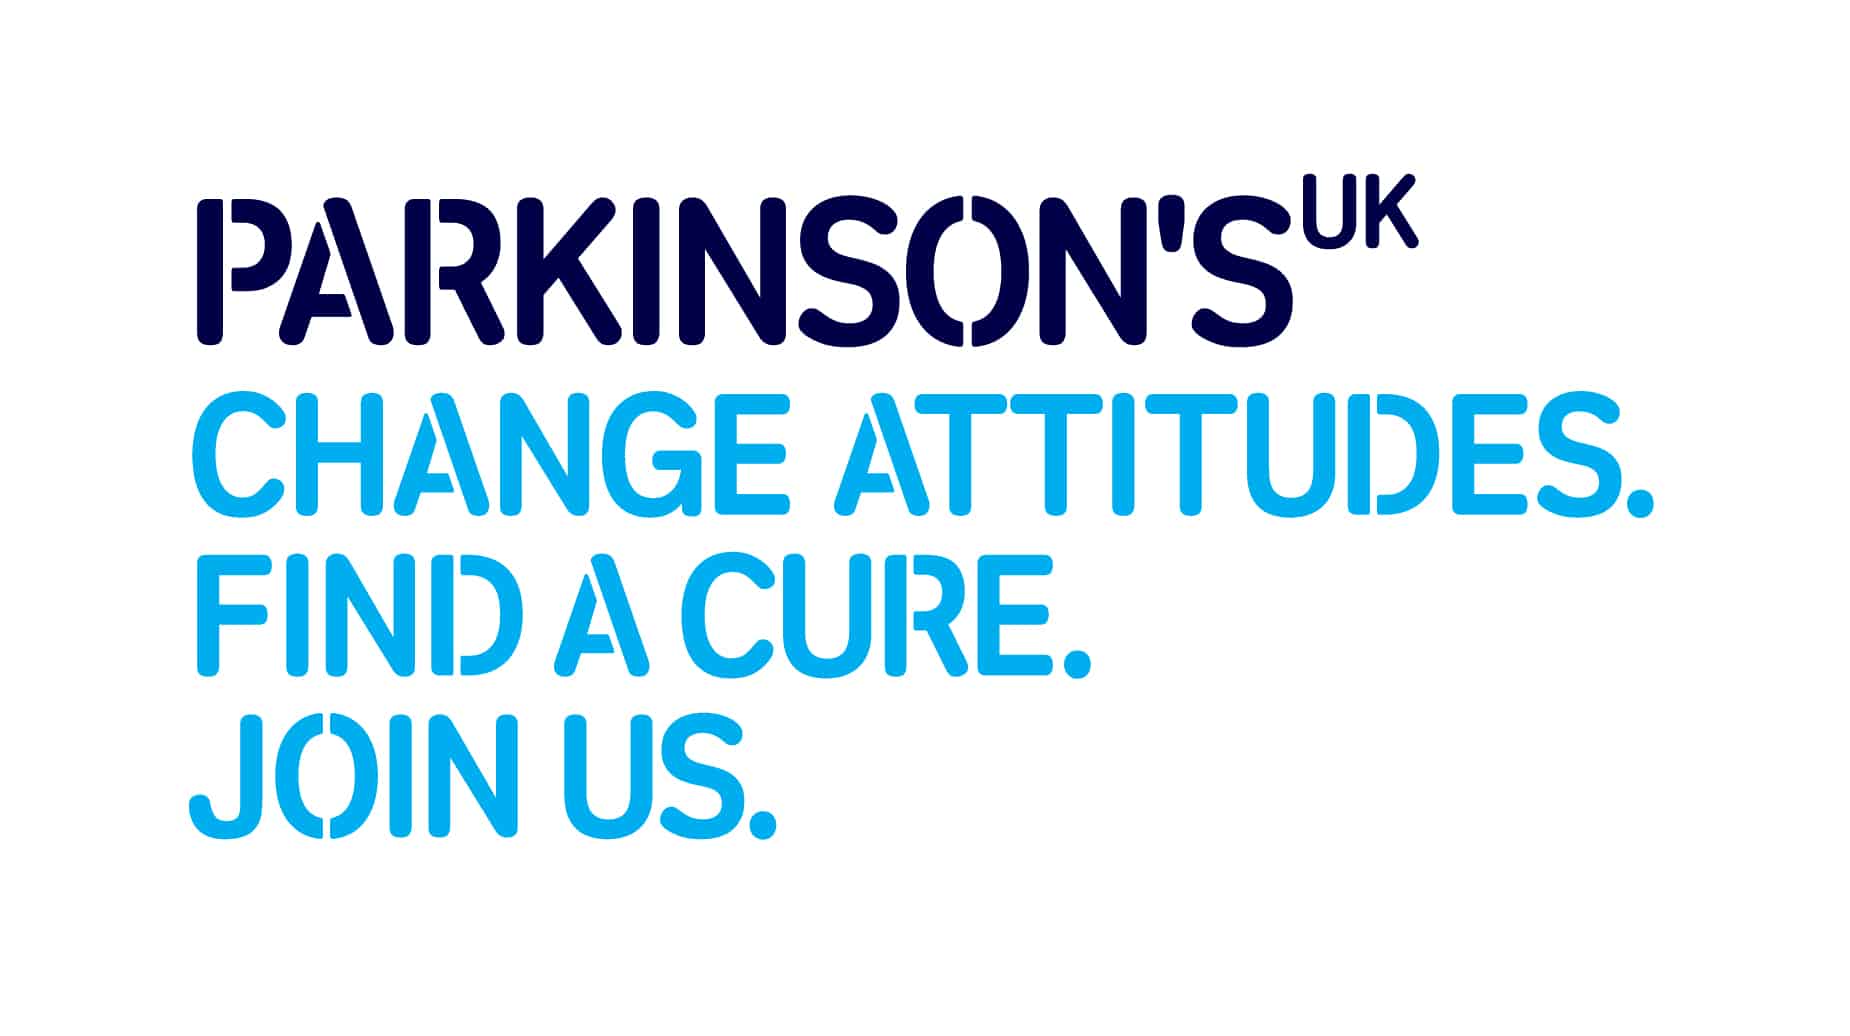 £134.00 raised for Parkinson's UK - 18th October 2022: